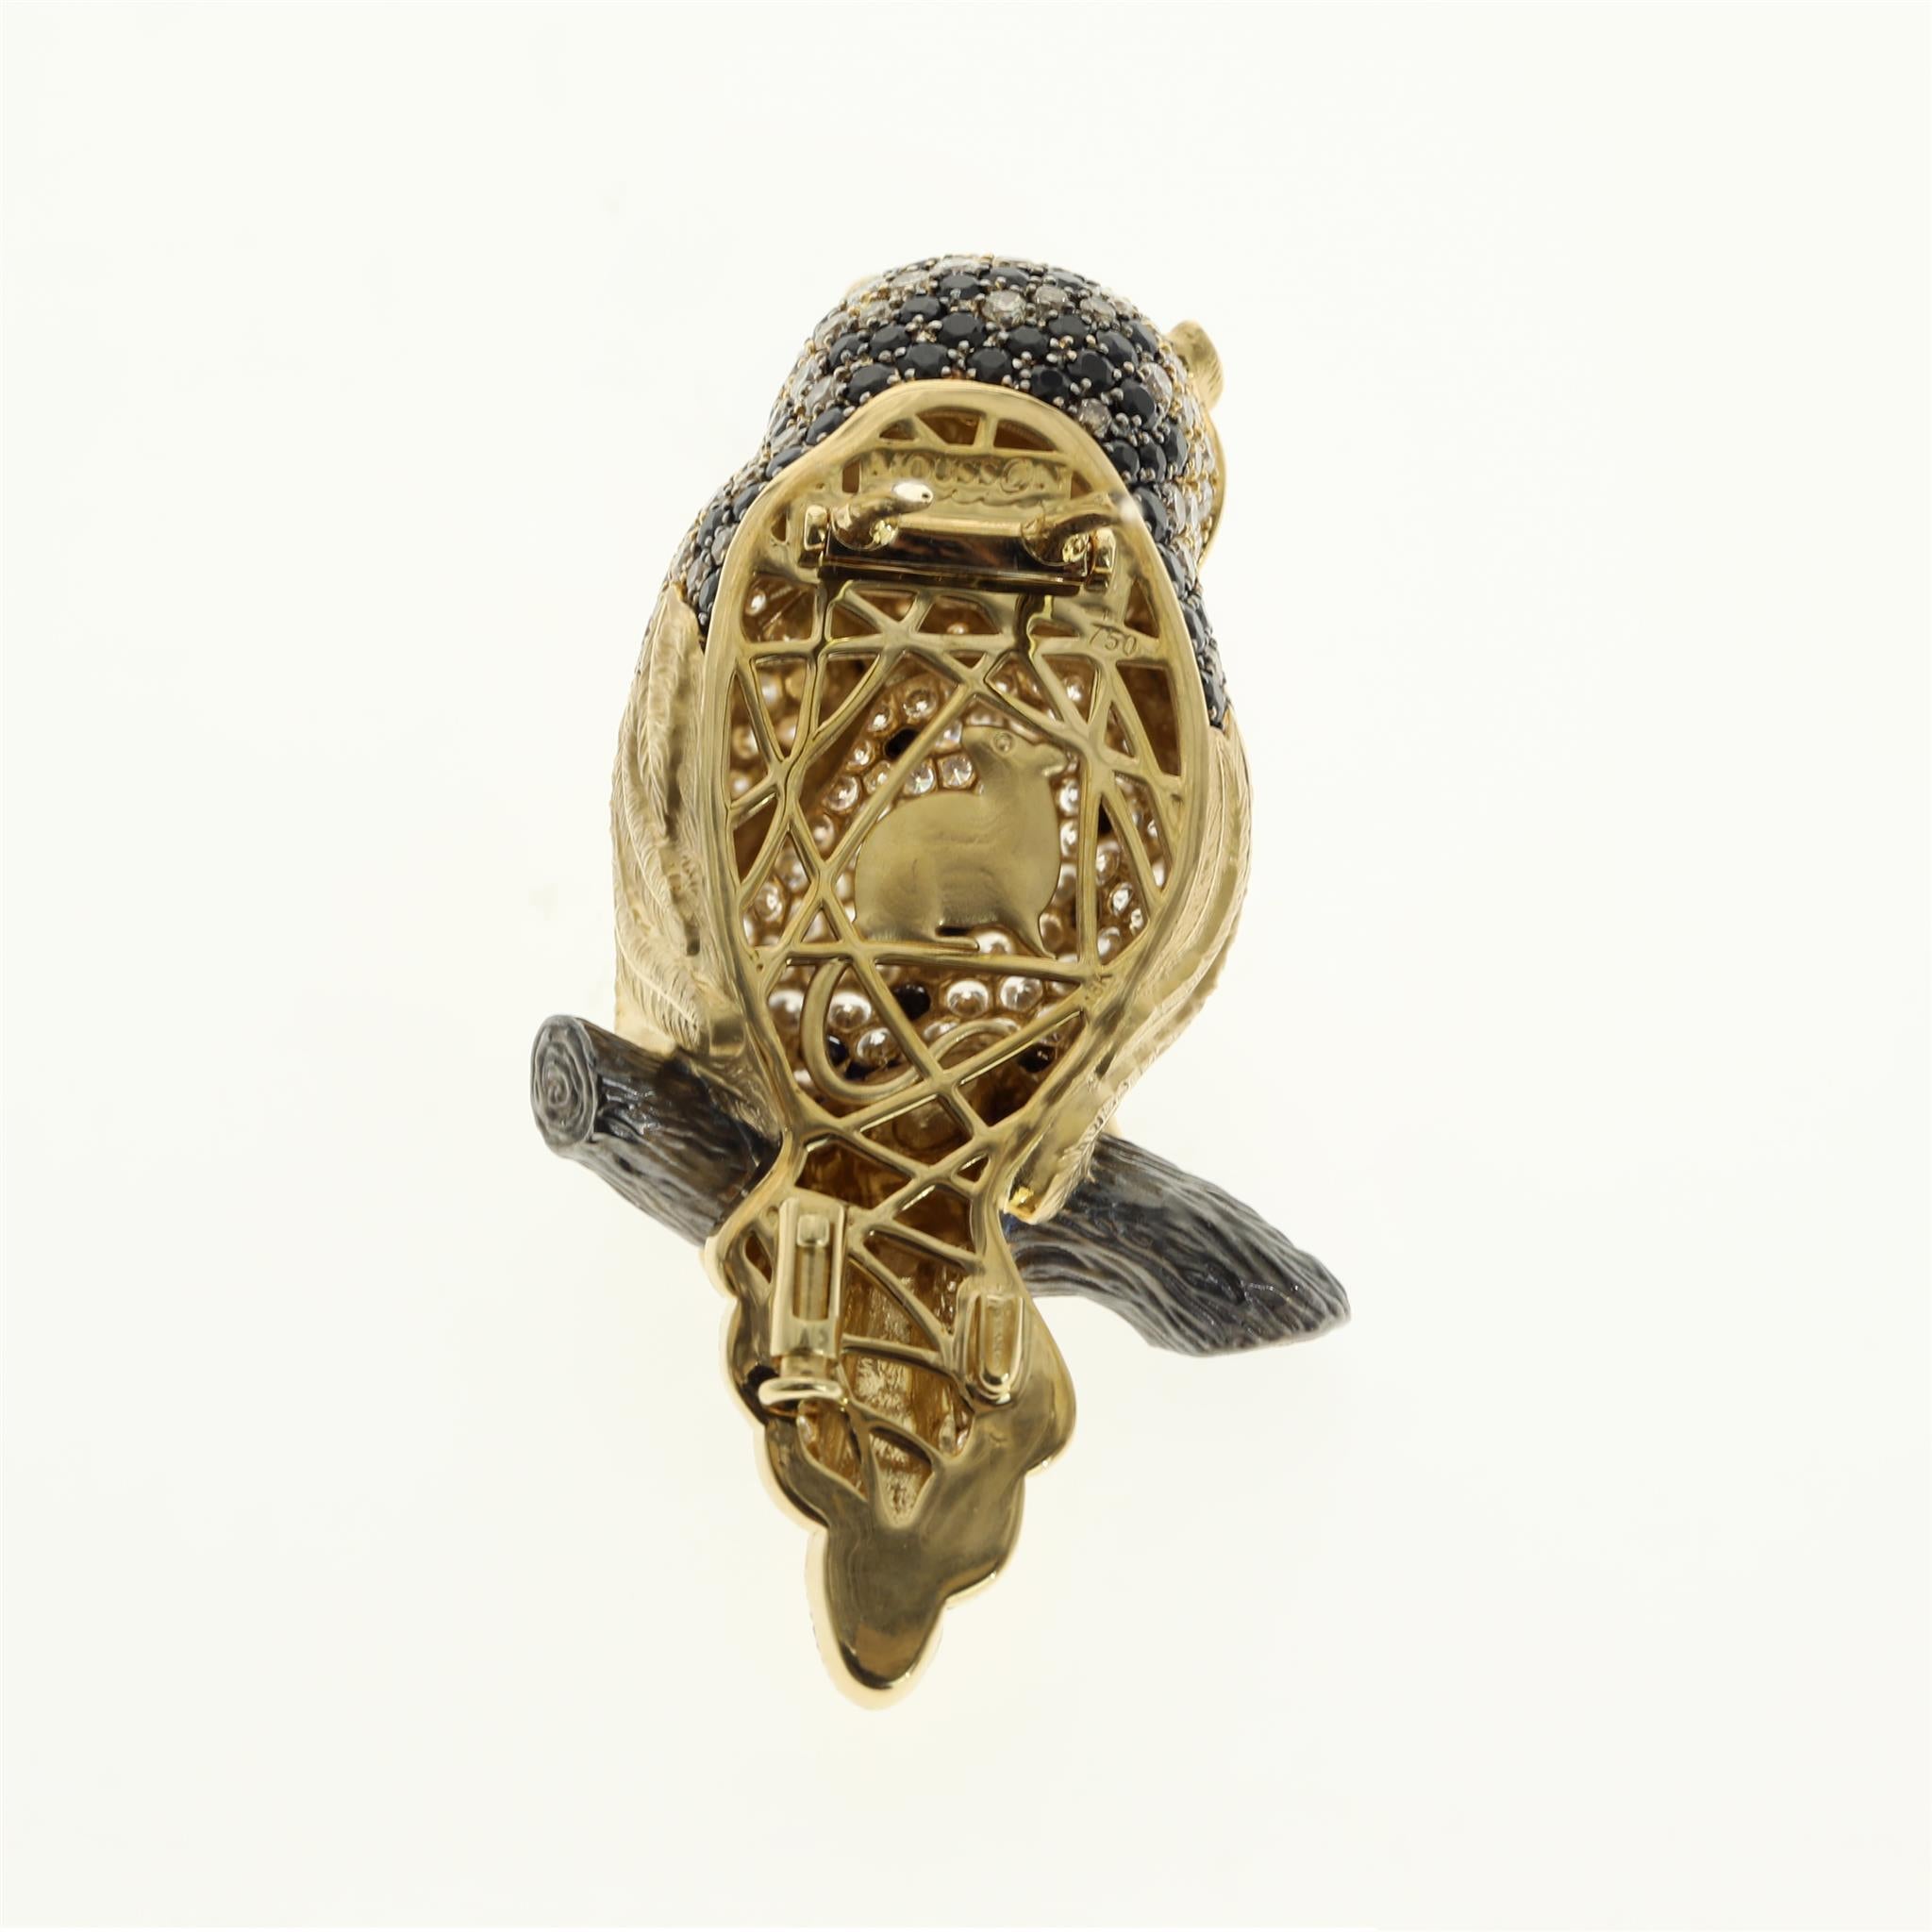 Diamond Sapphire 18 Karat Yellow Gold Owl Brooch

18 Karat Yellow Gold, Diamond 2.89 carat, Brown Diamond 1.04 carat, Sapphire 2.24 carat Owl brooch. Two pin system for the perfect wearing, it will never fell down. All feather are engraved by hand.